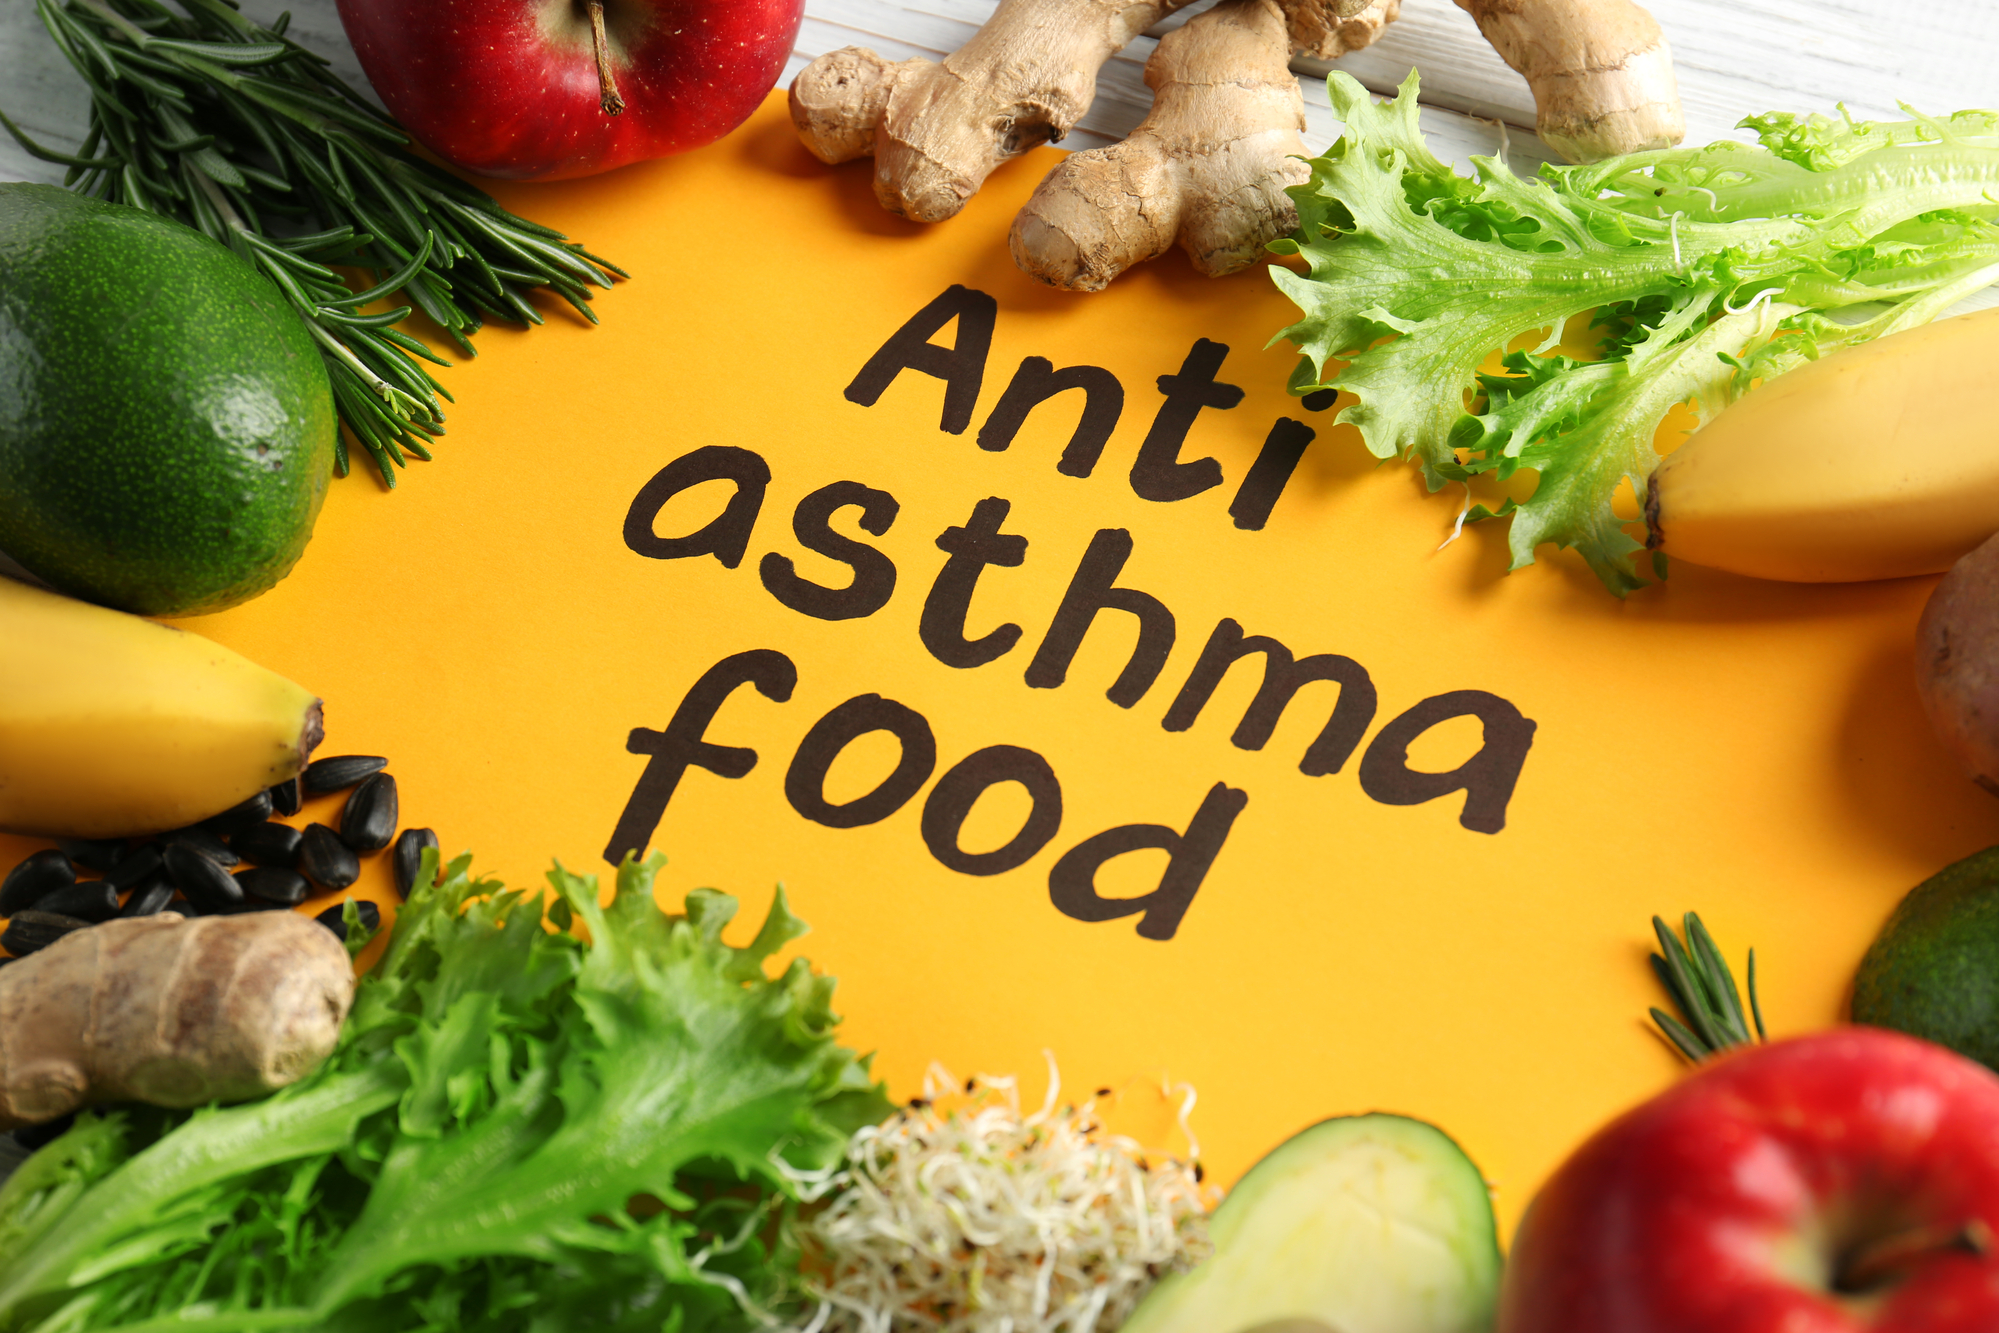 Fresh vegetables and fruits around text ANTI ASTHMA FOOD, close up